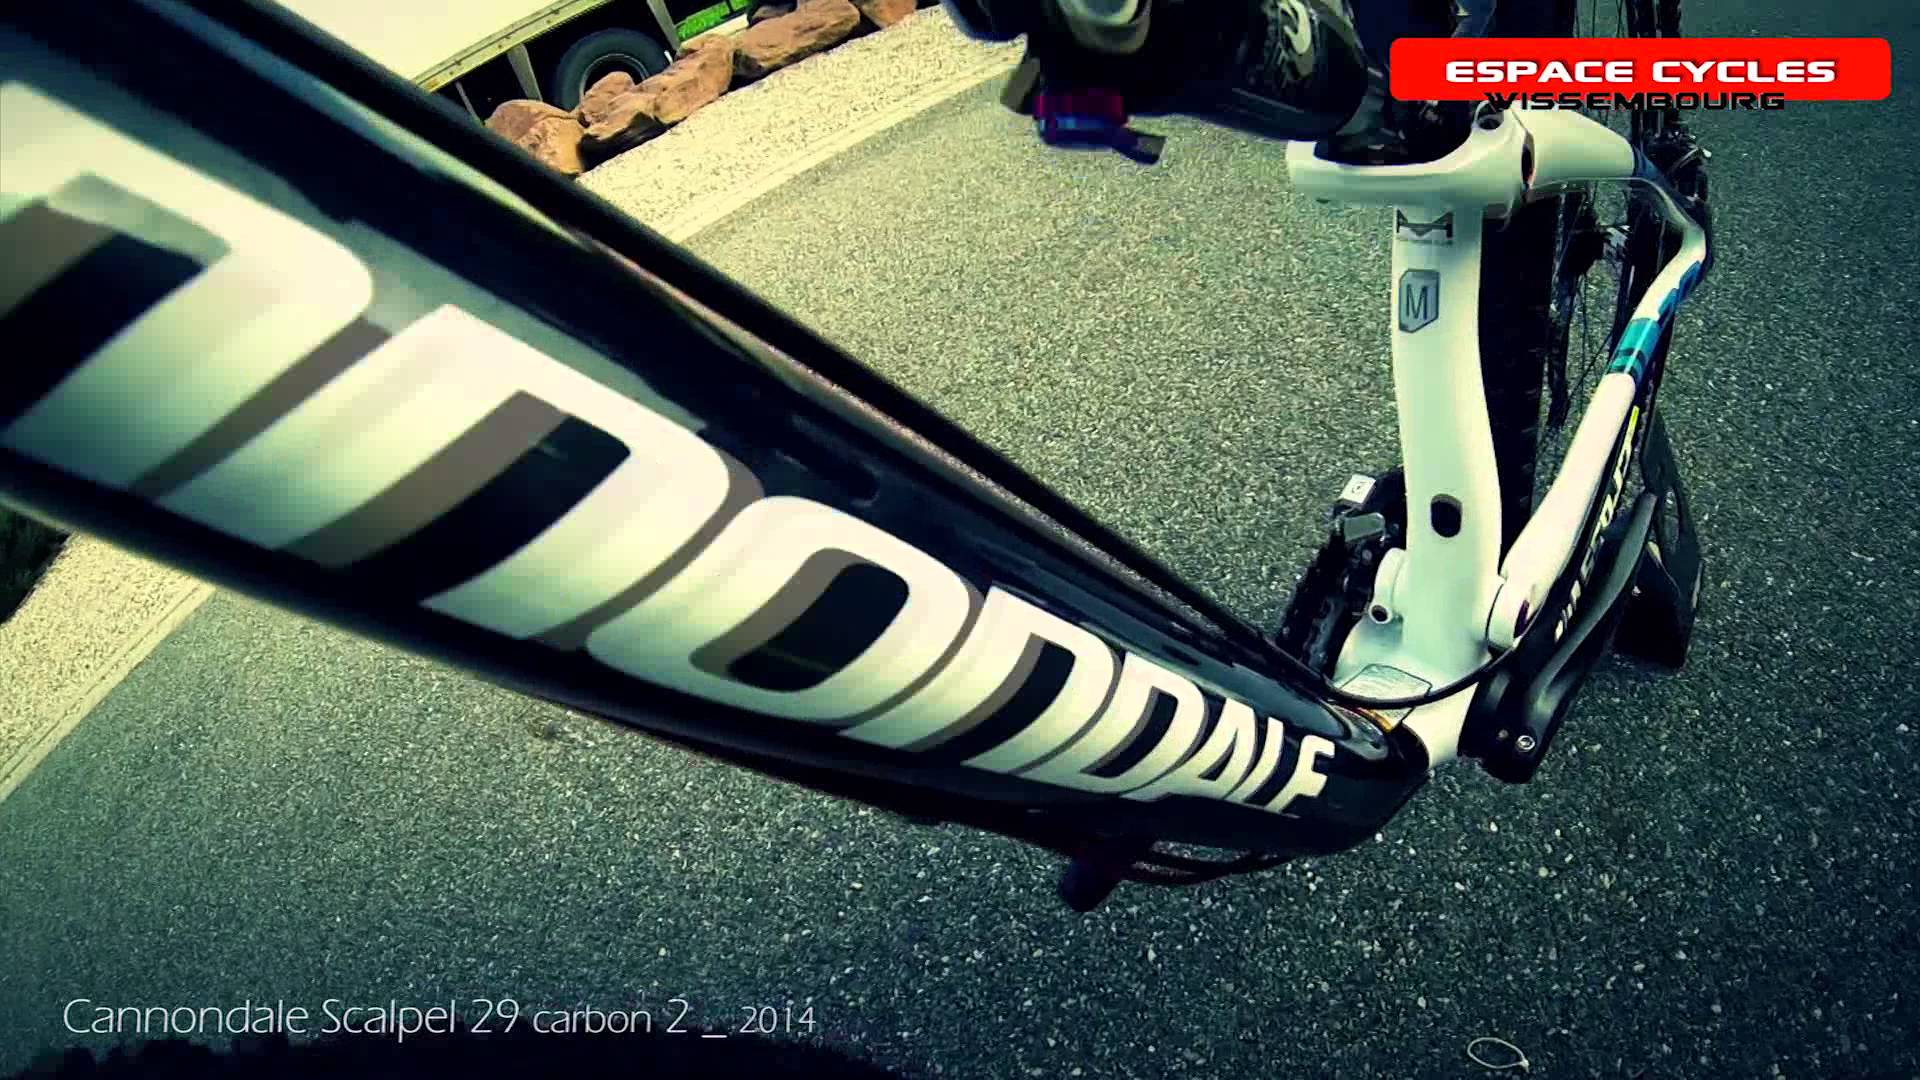 Cannondale Scalpel 29 carbon 2 - 2014 - YouTube